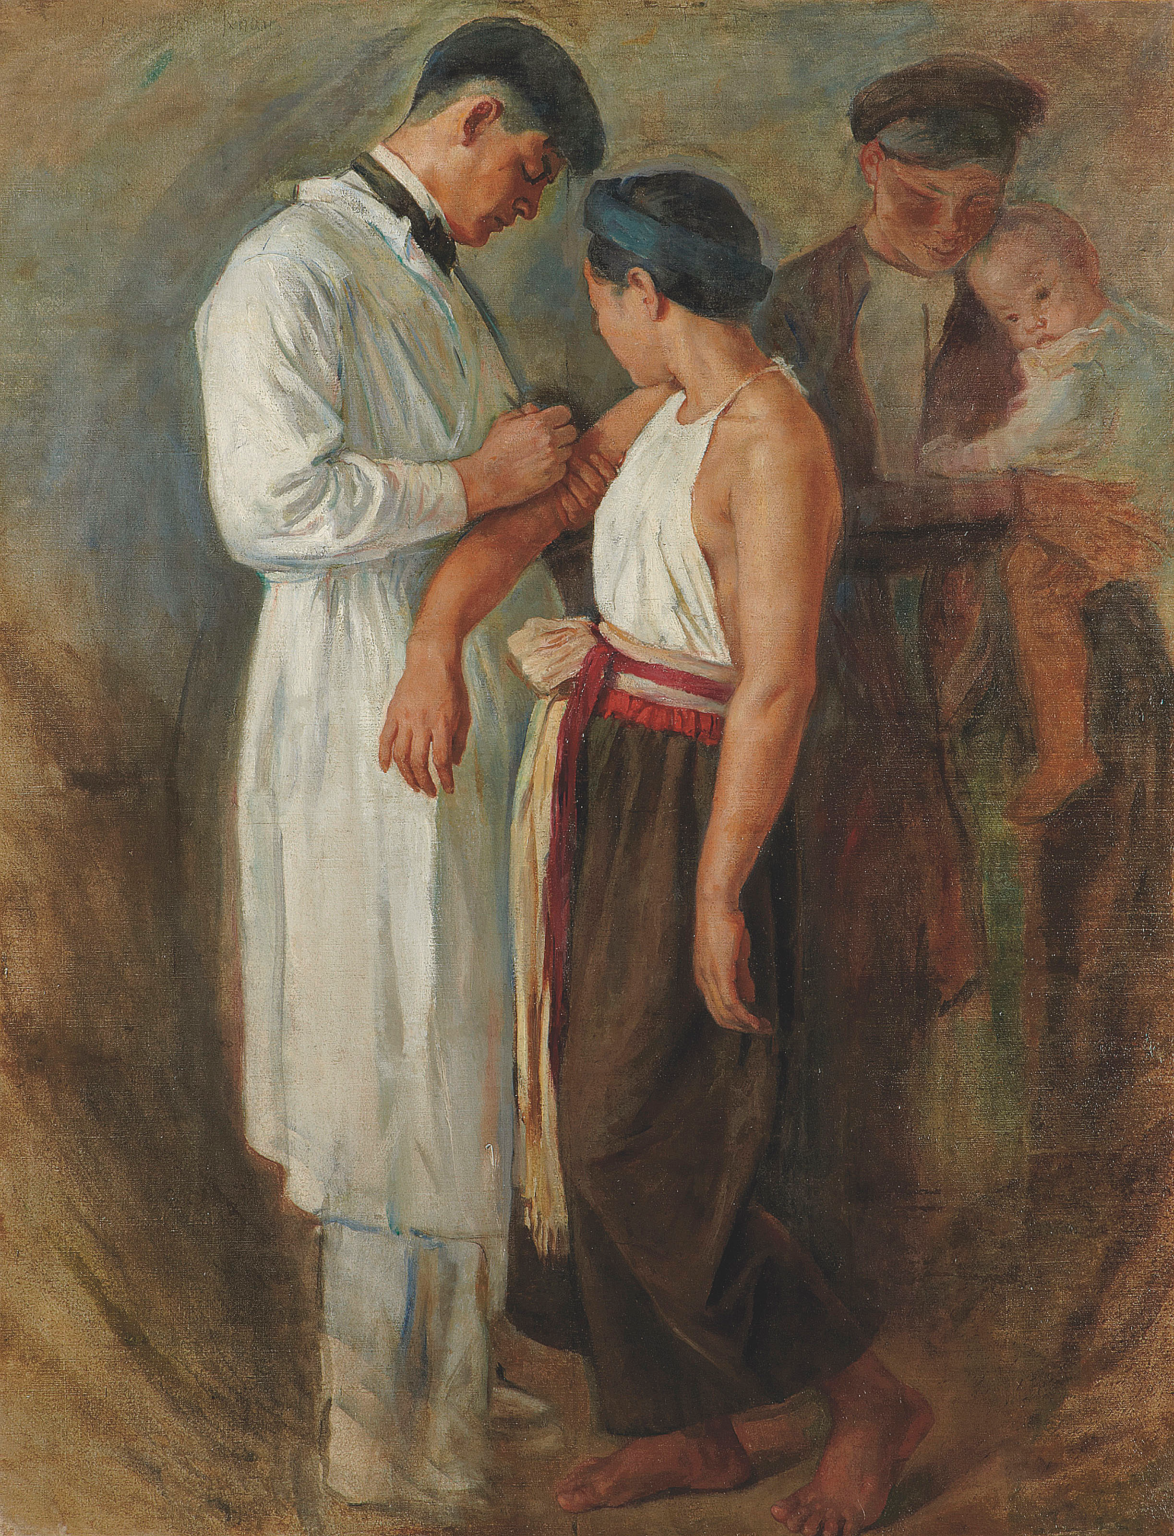 Victor Tardieu (French, 1870-1937)
La Vaccination
oil on canvas
119 x 90 cm. (46 7/8 x 35 1/2 in.)
Painted circa 1923